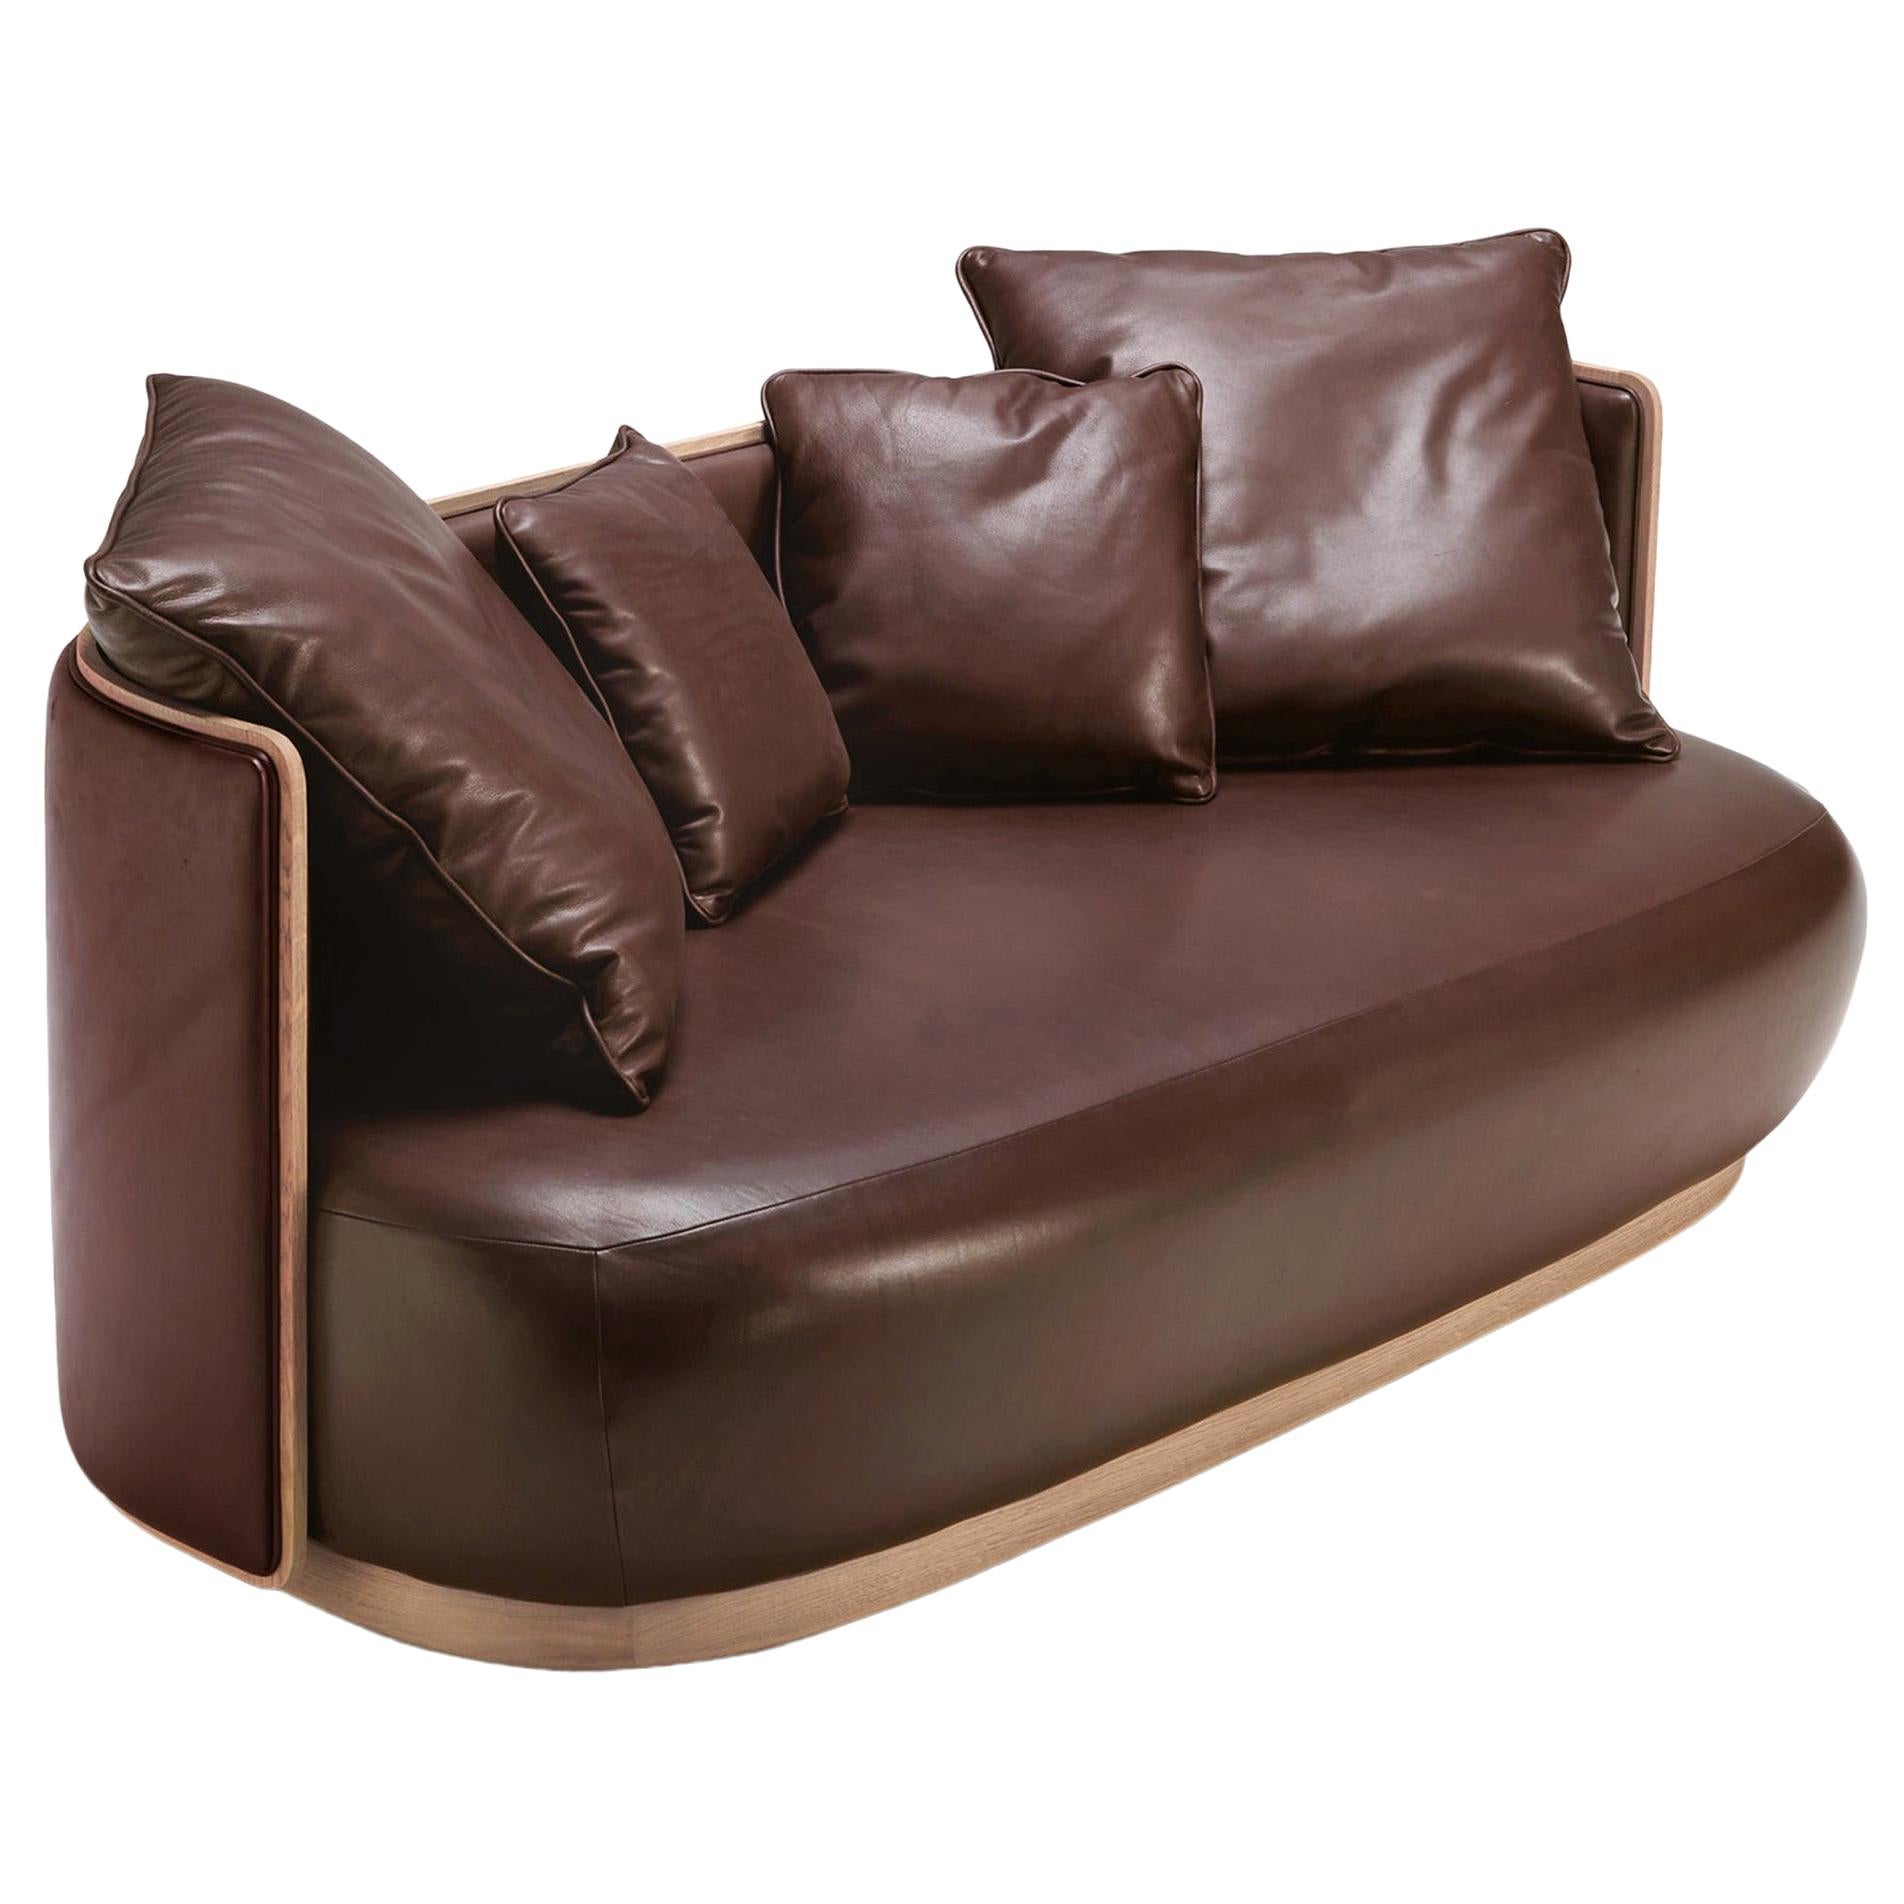 KIR ROYAL 2-Seater Curved Brown Sofa in Solid Wood and Covered with Leather For Sale